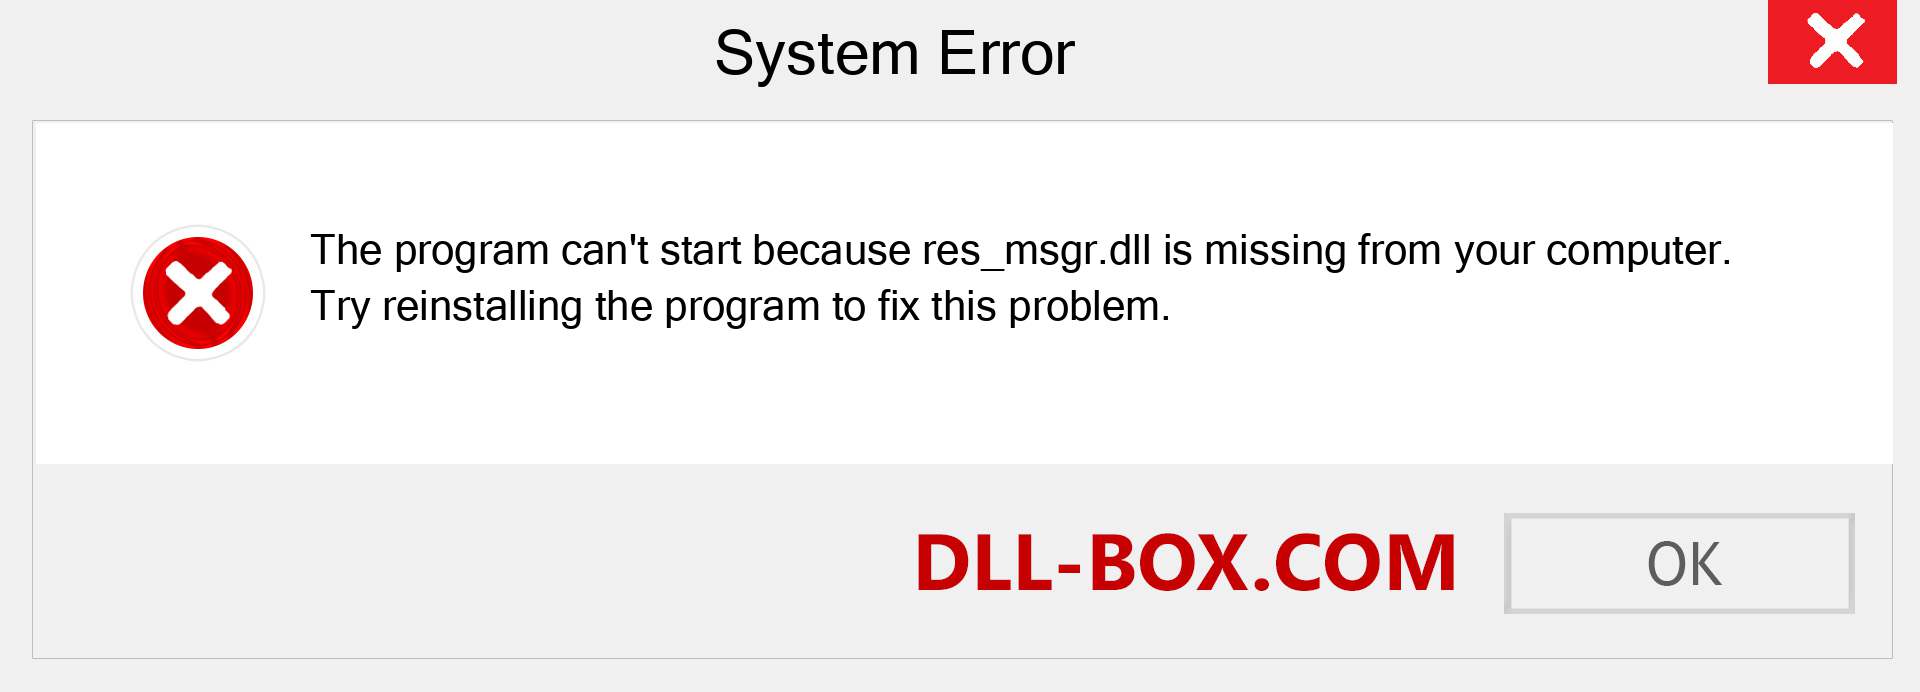  res_msgr.dll file is missing?. Download for Windows 7, 8, 10 - Fix  res_msgr dll Missing Error on Windows, photos, images